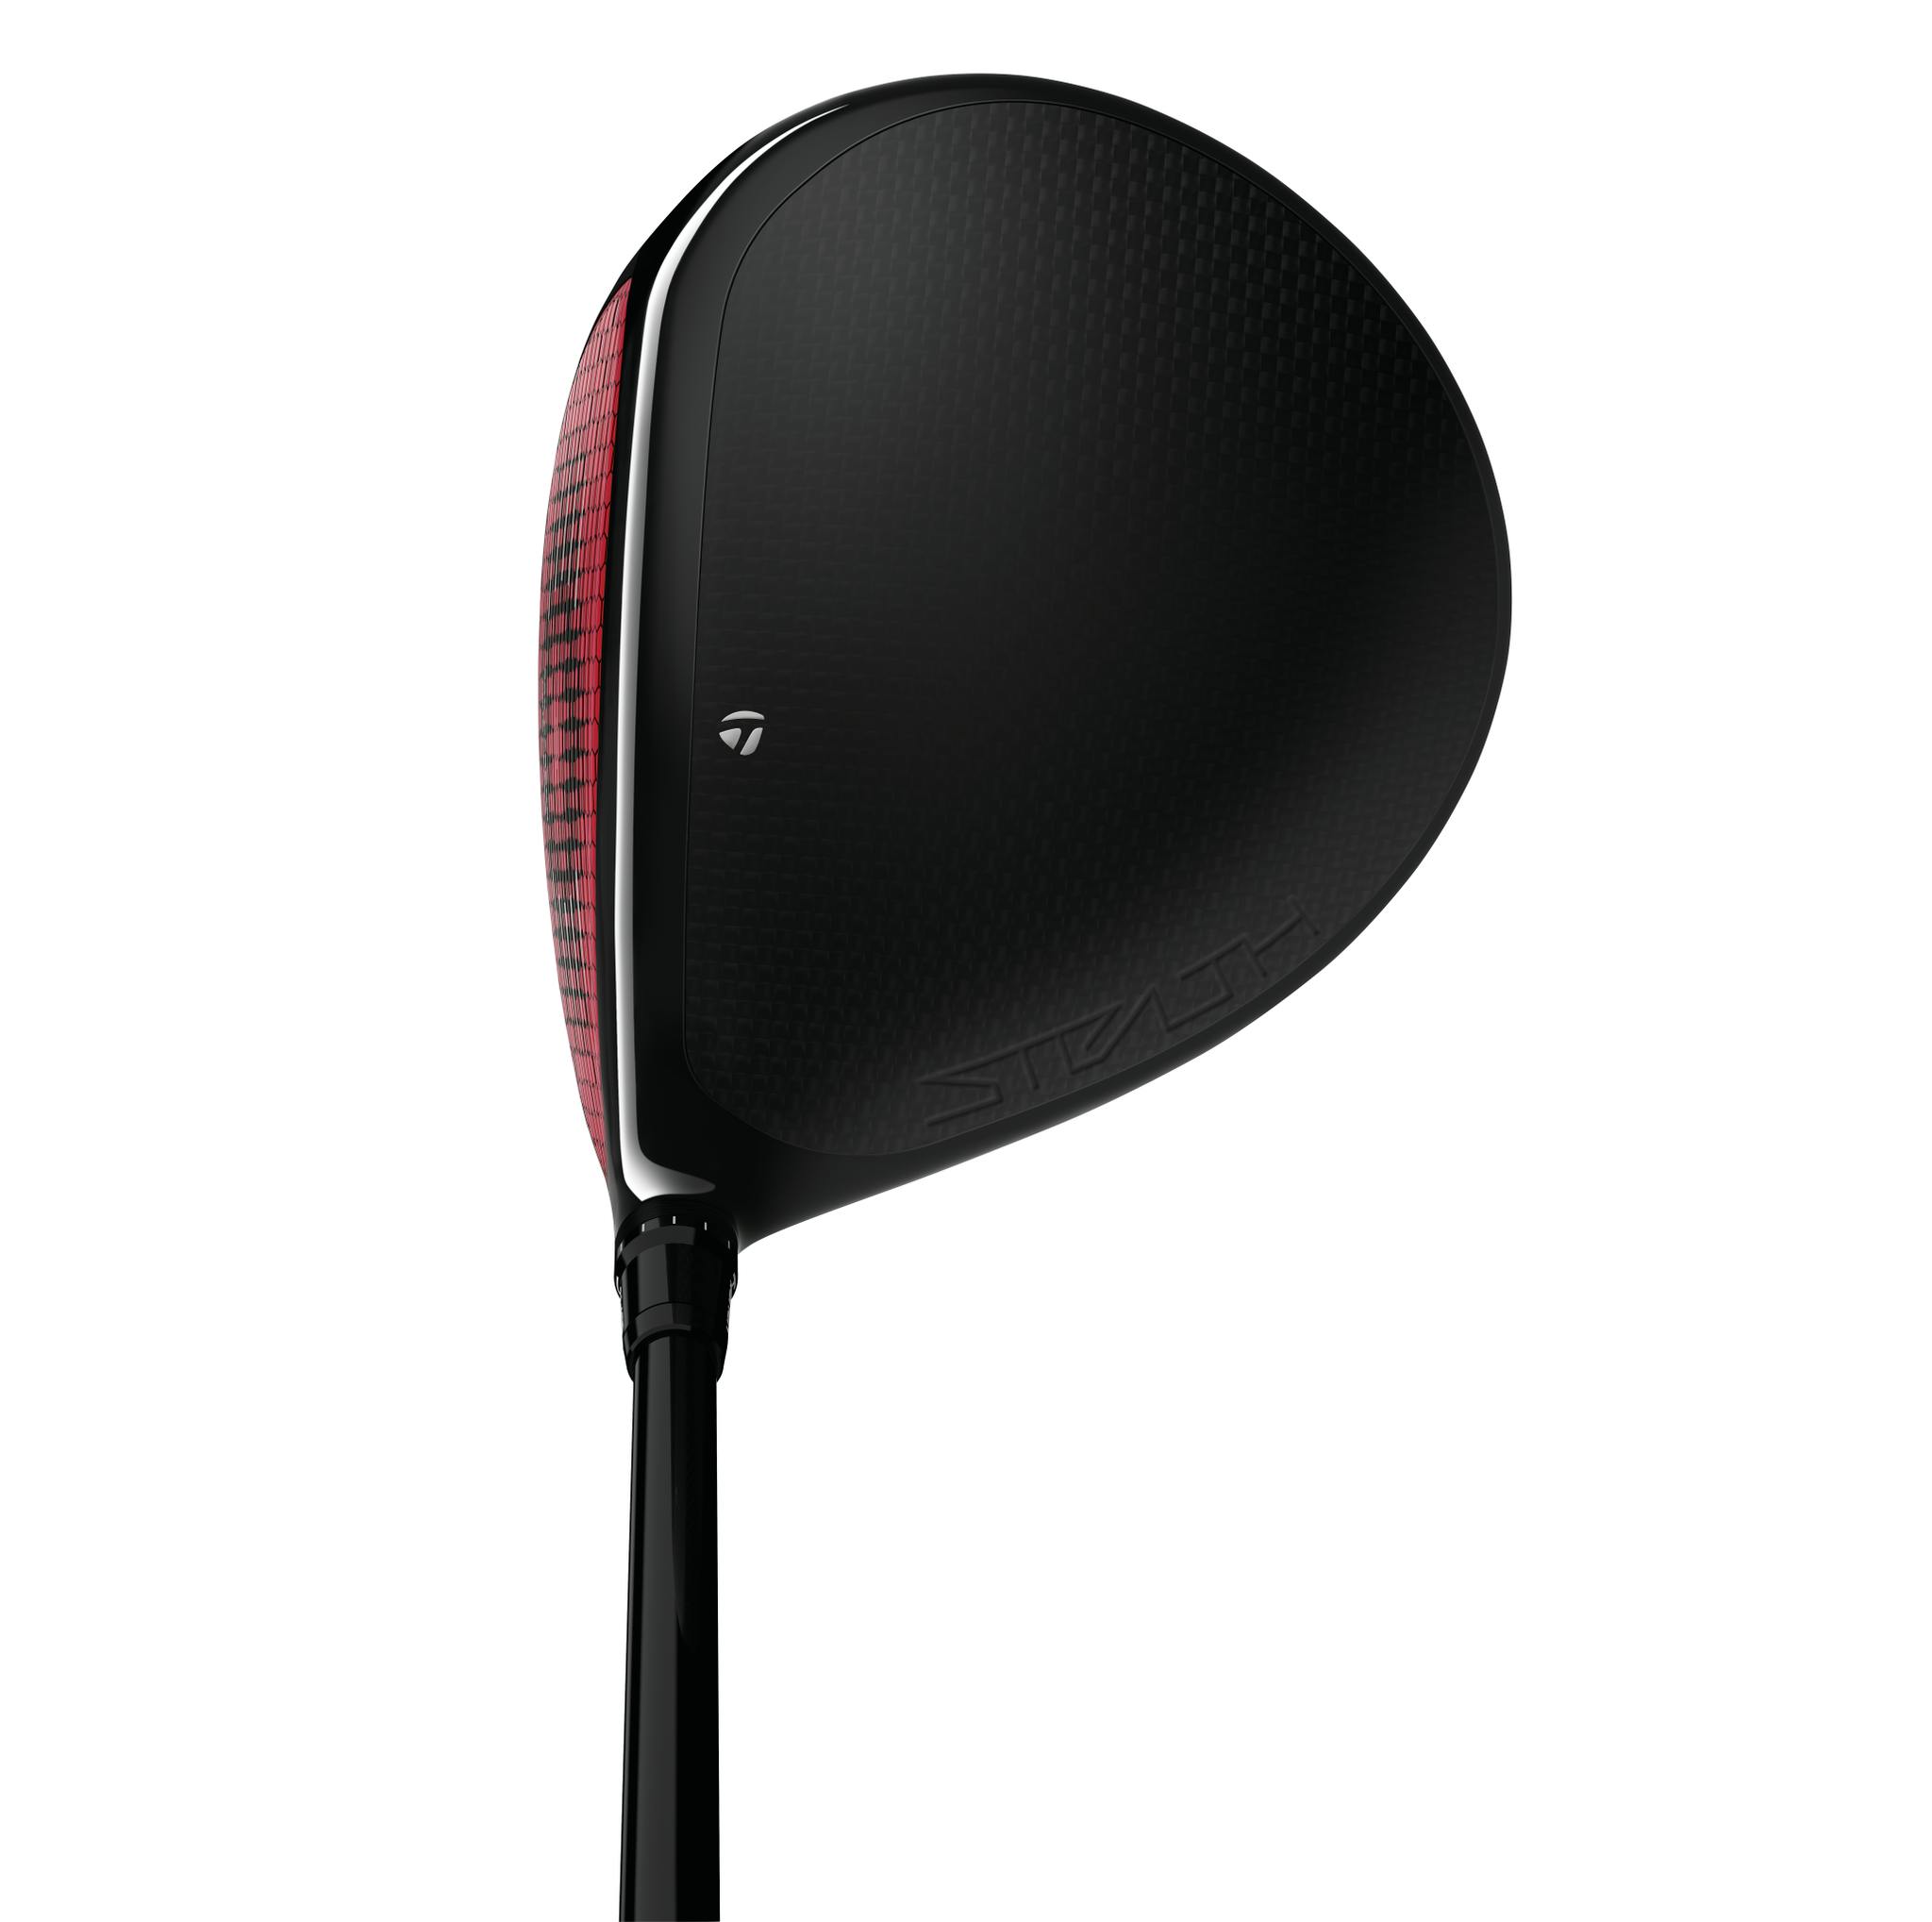 TaylorMade Stealth Plus+ Driver | Curated.com